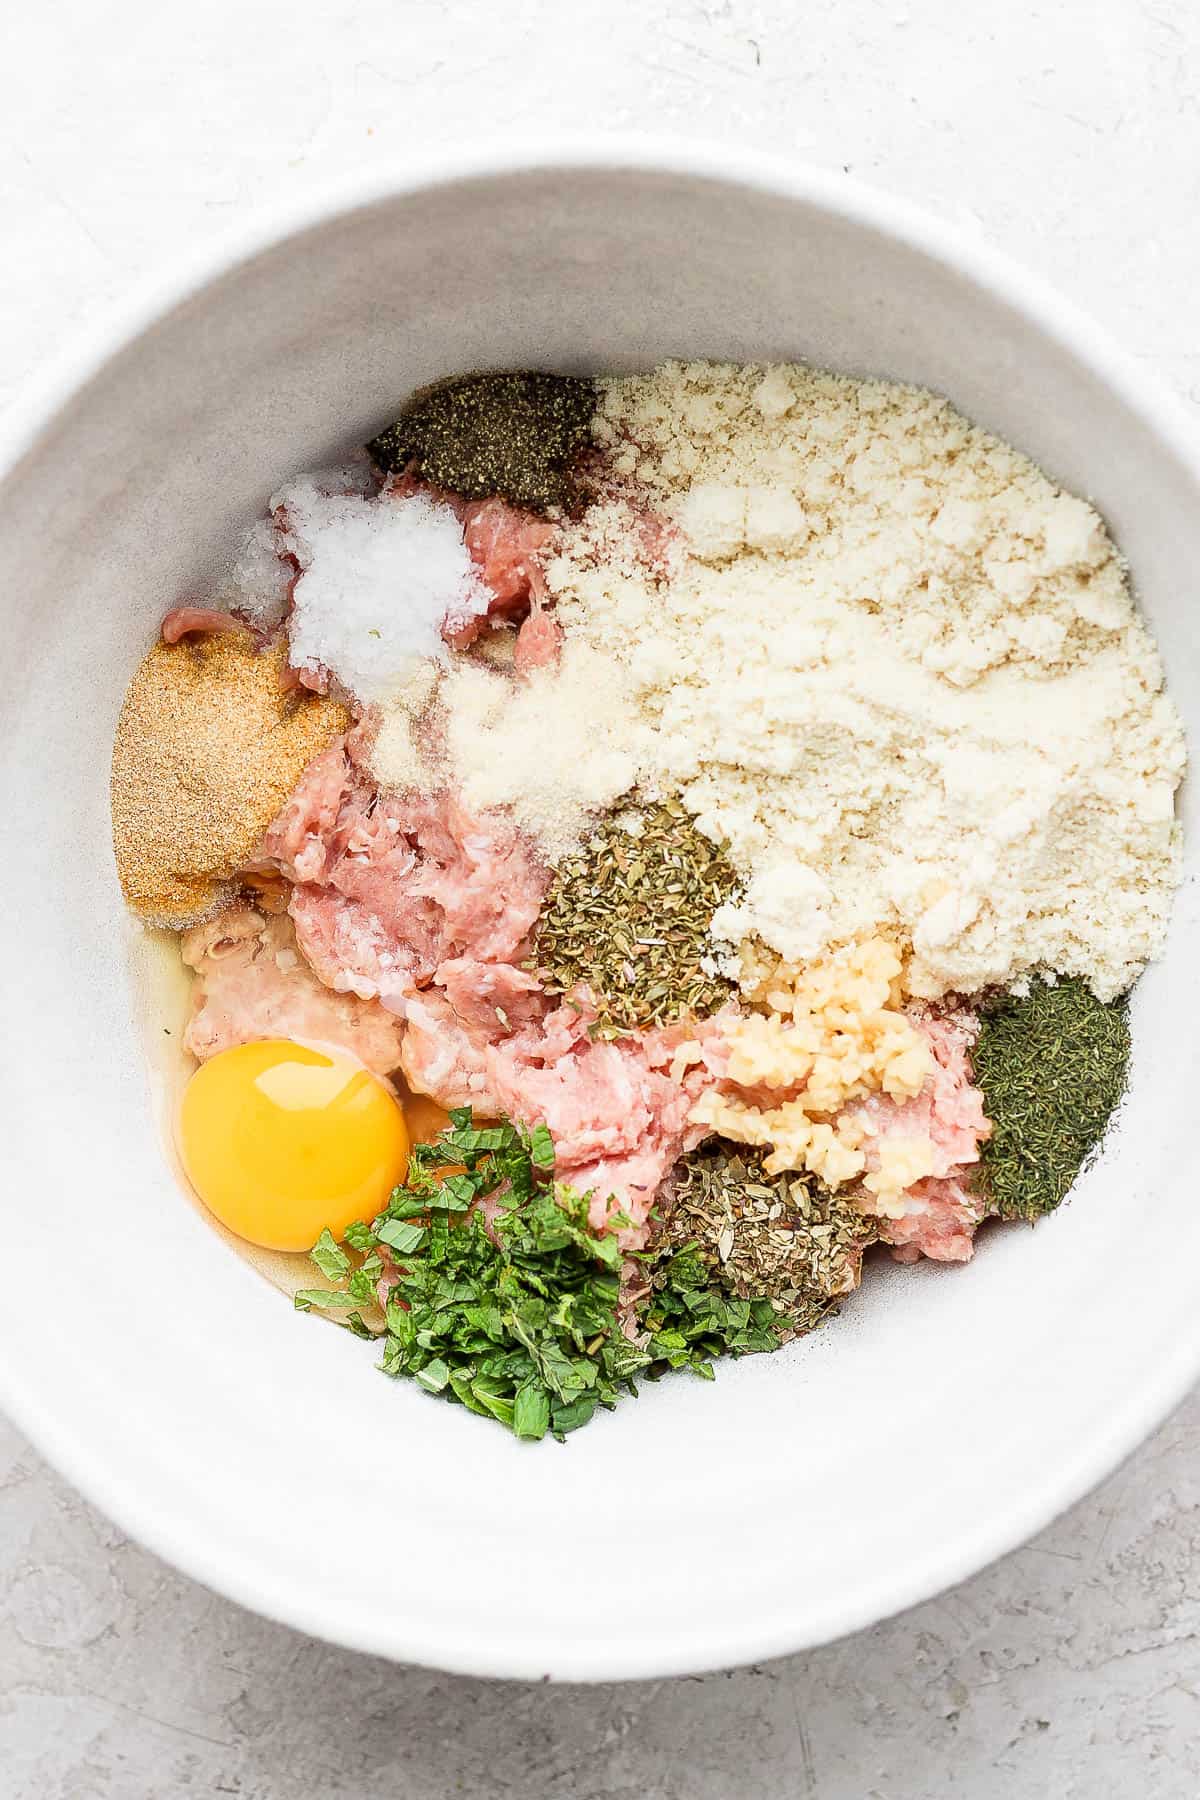 All of the meatball ingredients in a bowl.